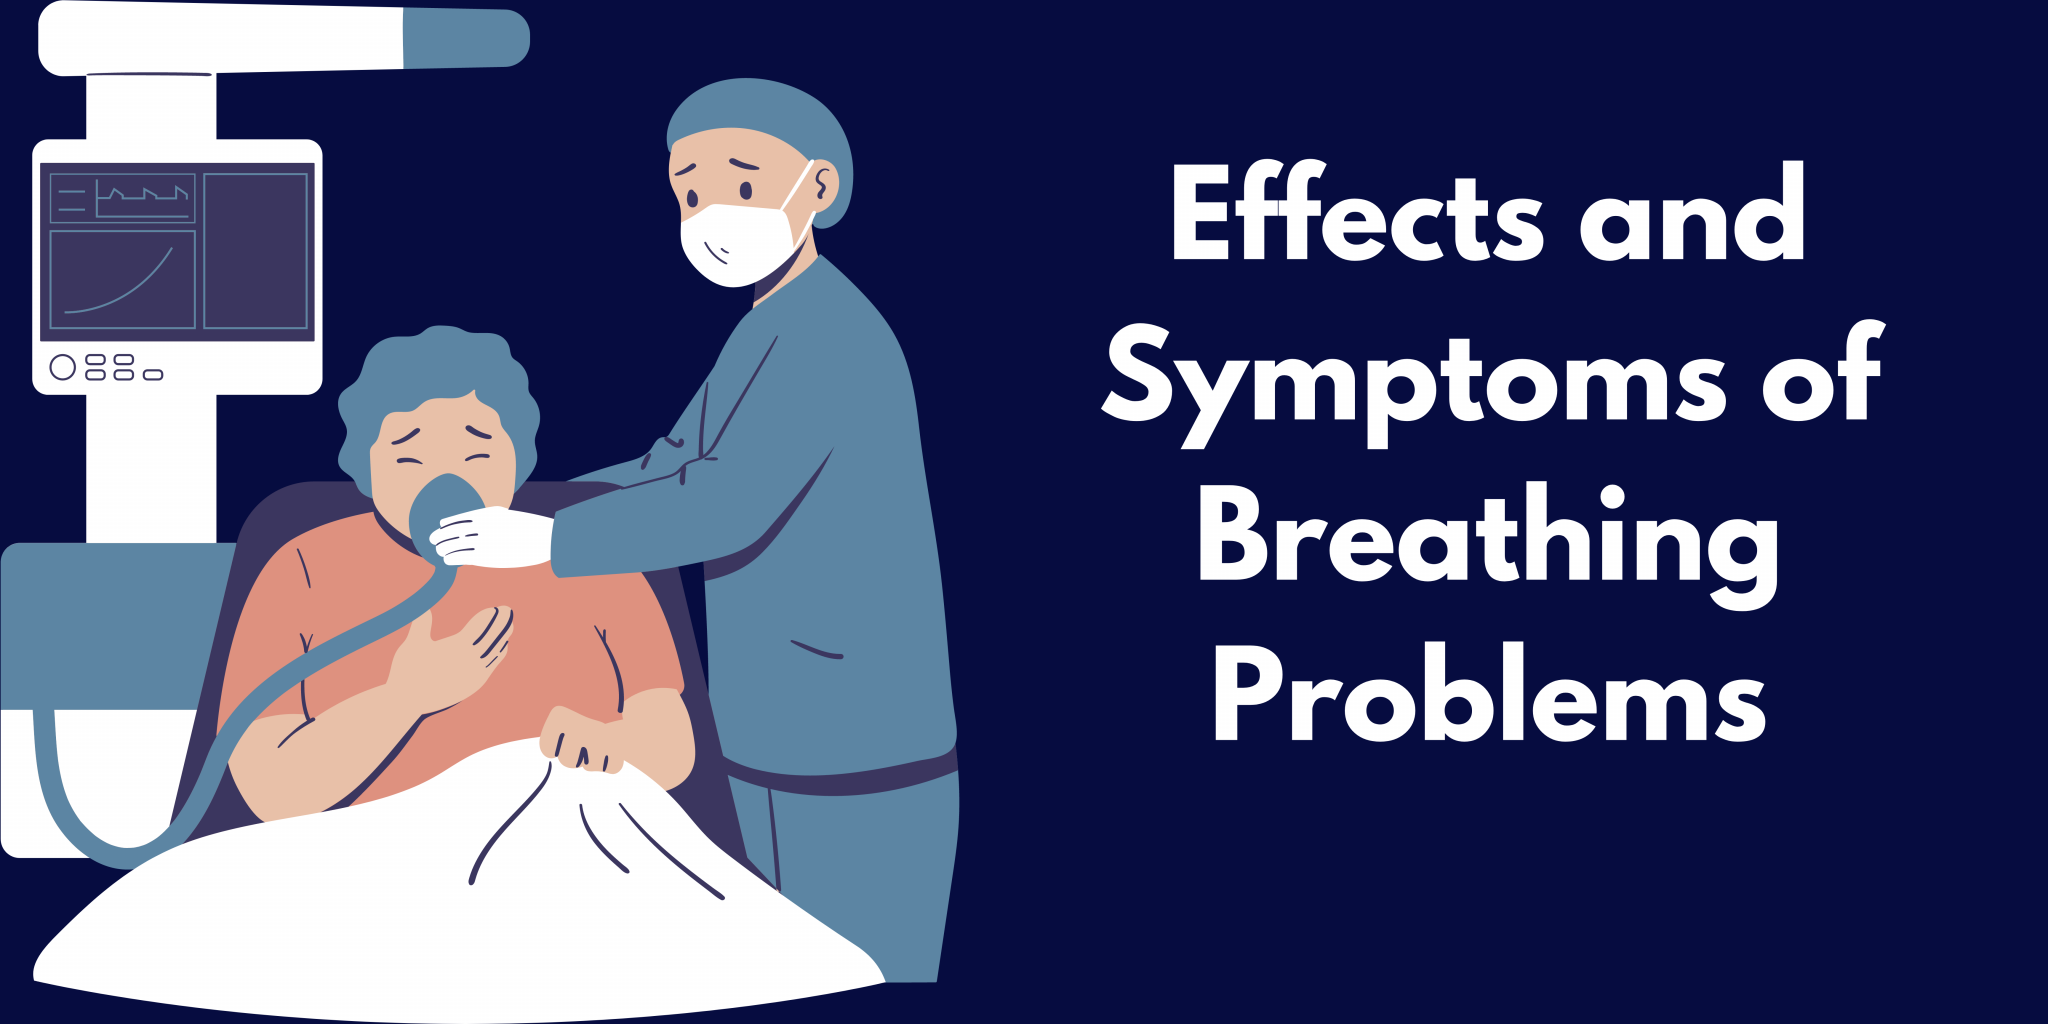 Effects And Symptoms Of Breathing Problems Magazinost